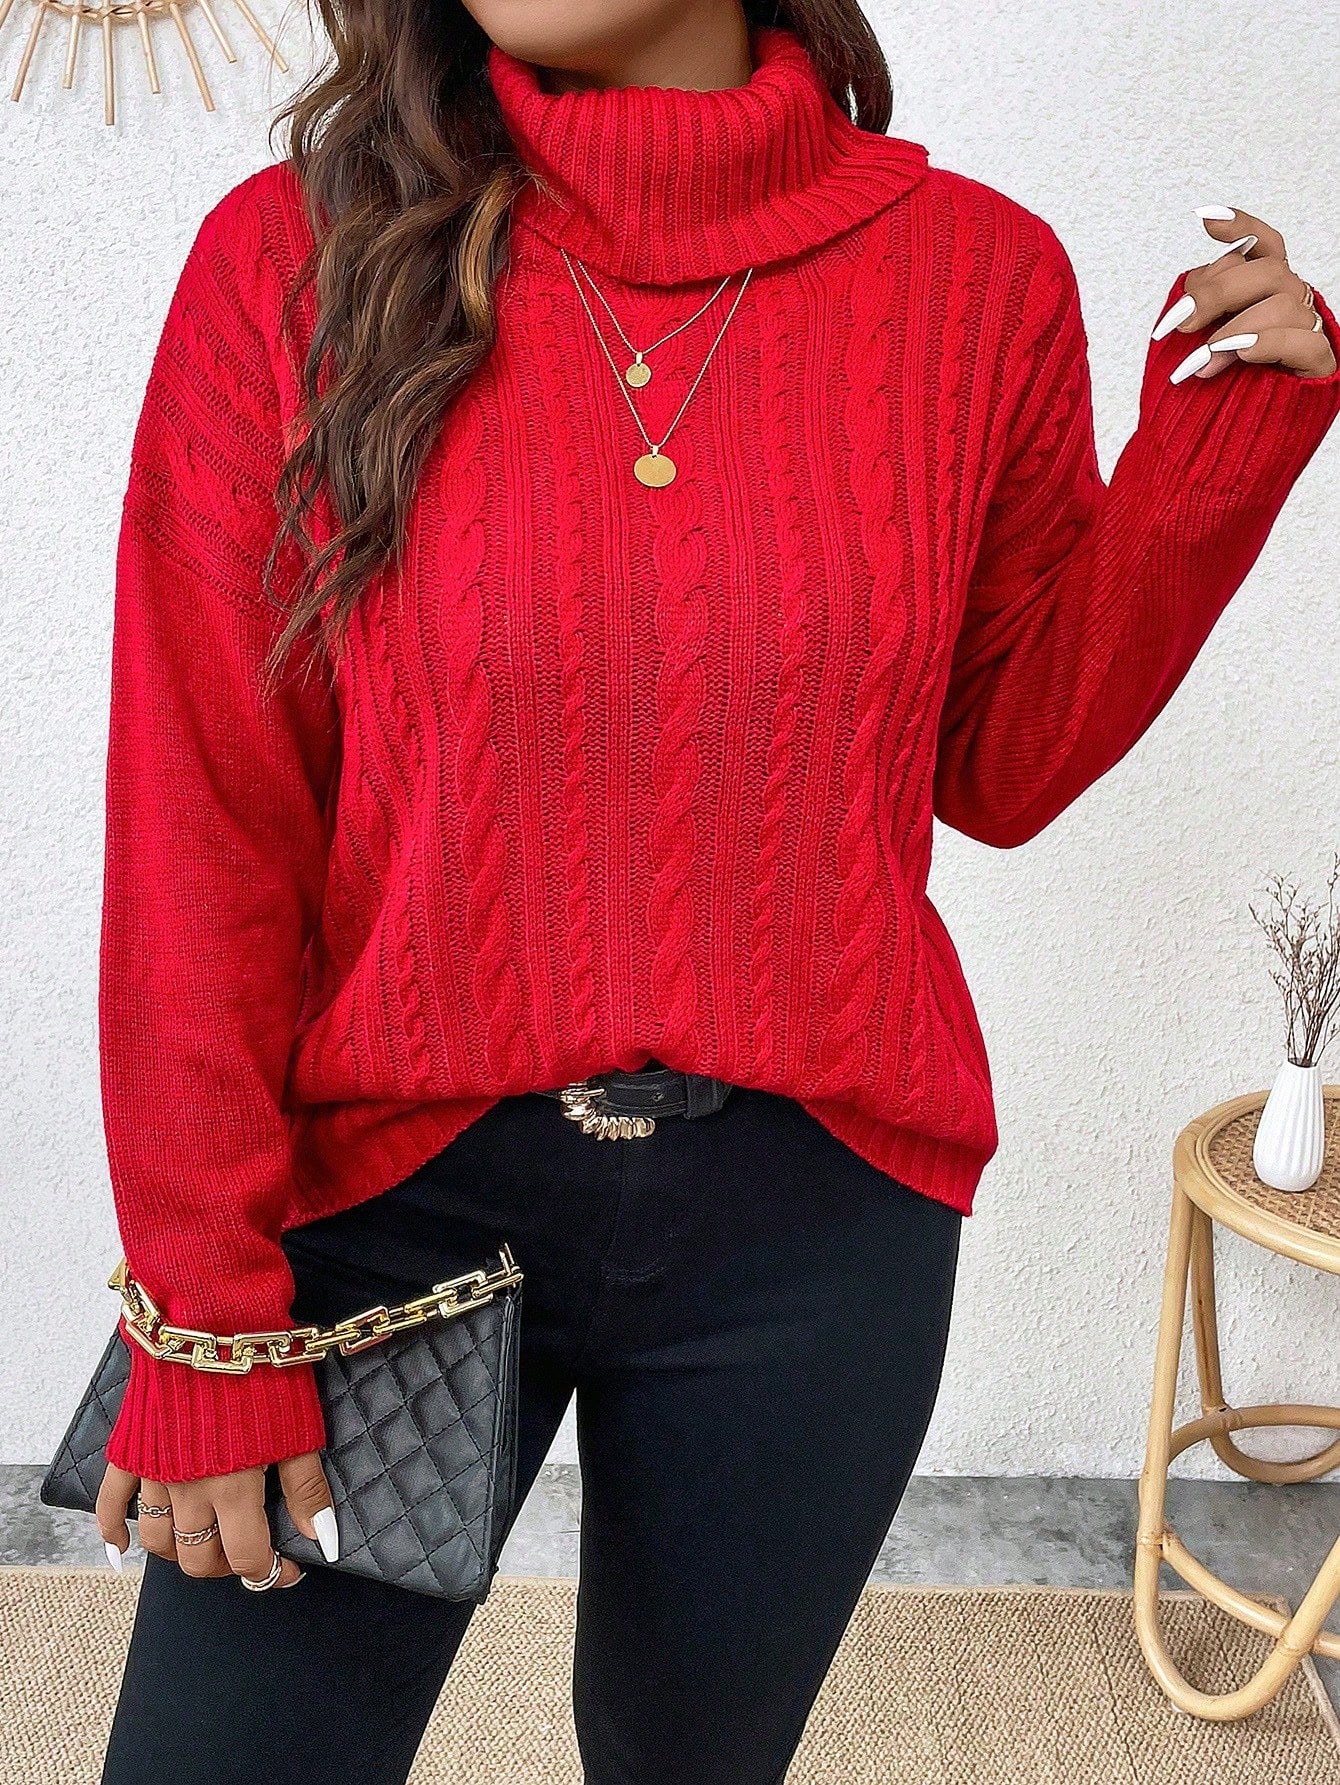 Solid Color Twist Knit Turtleneck Pullover Sweater